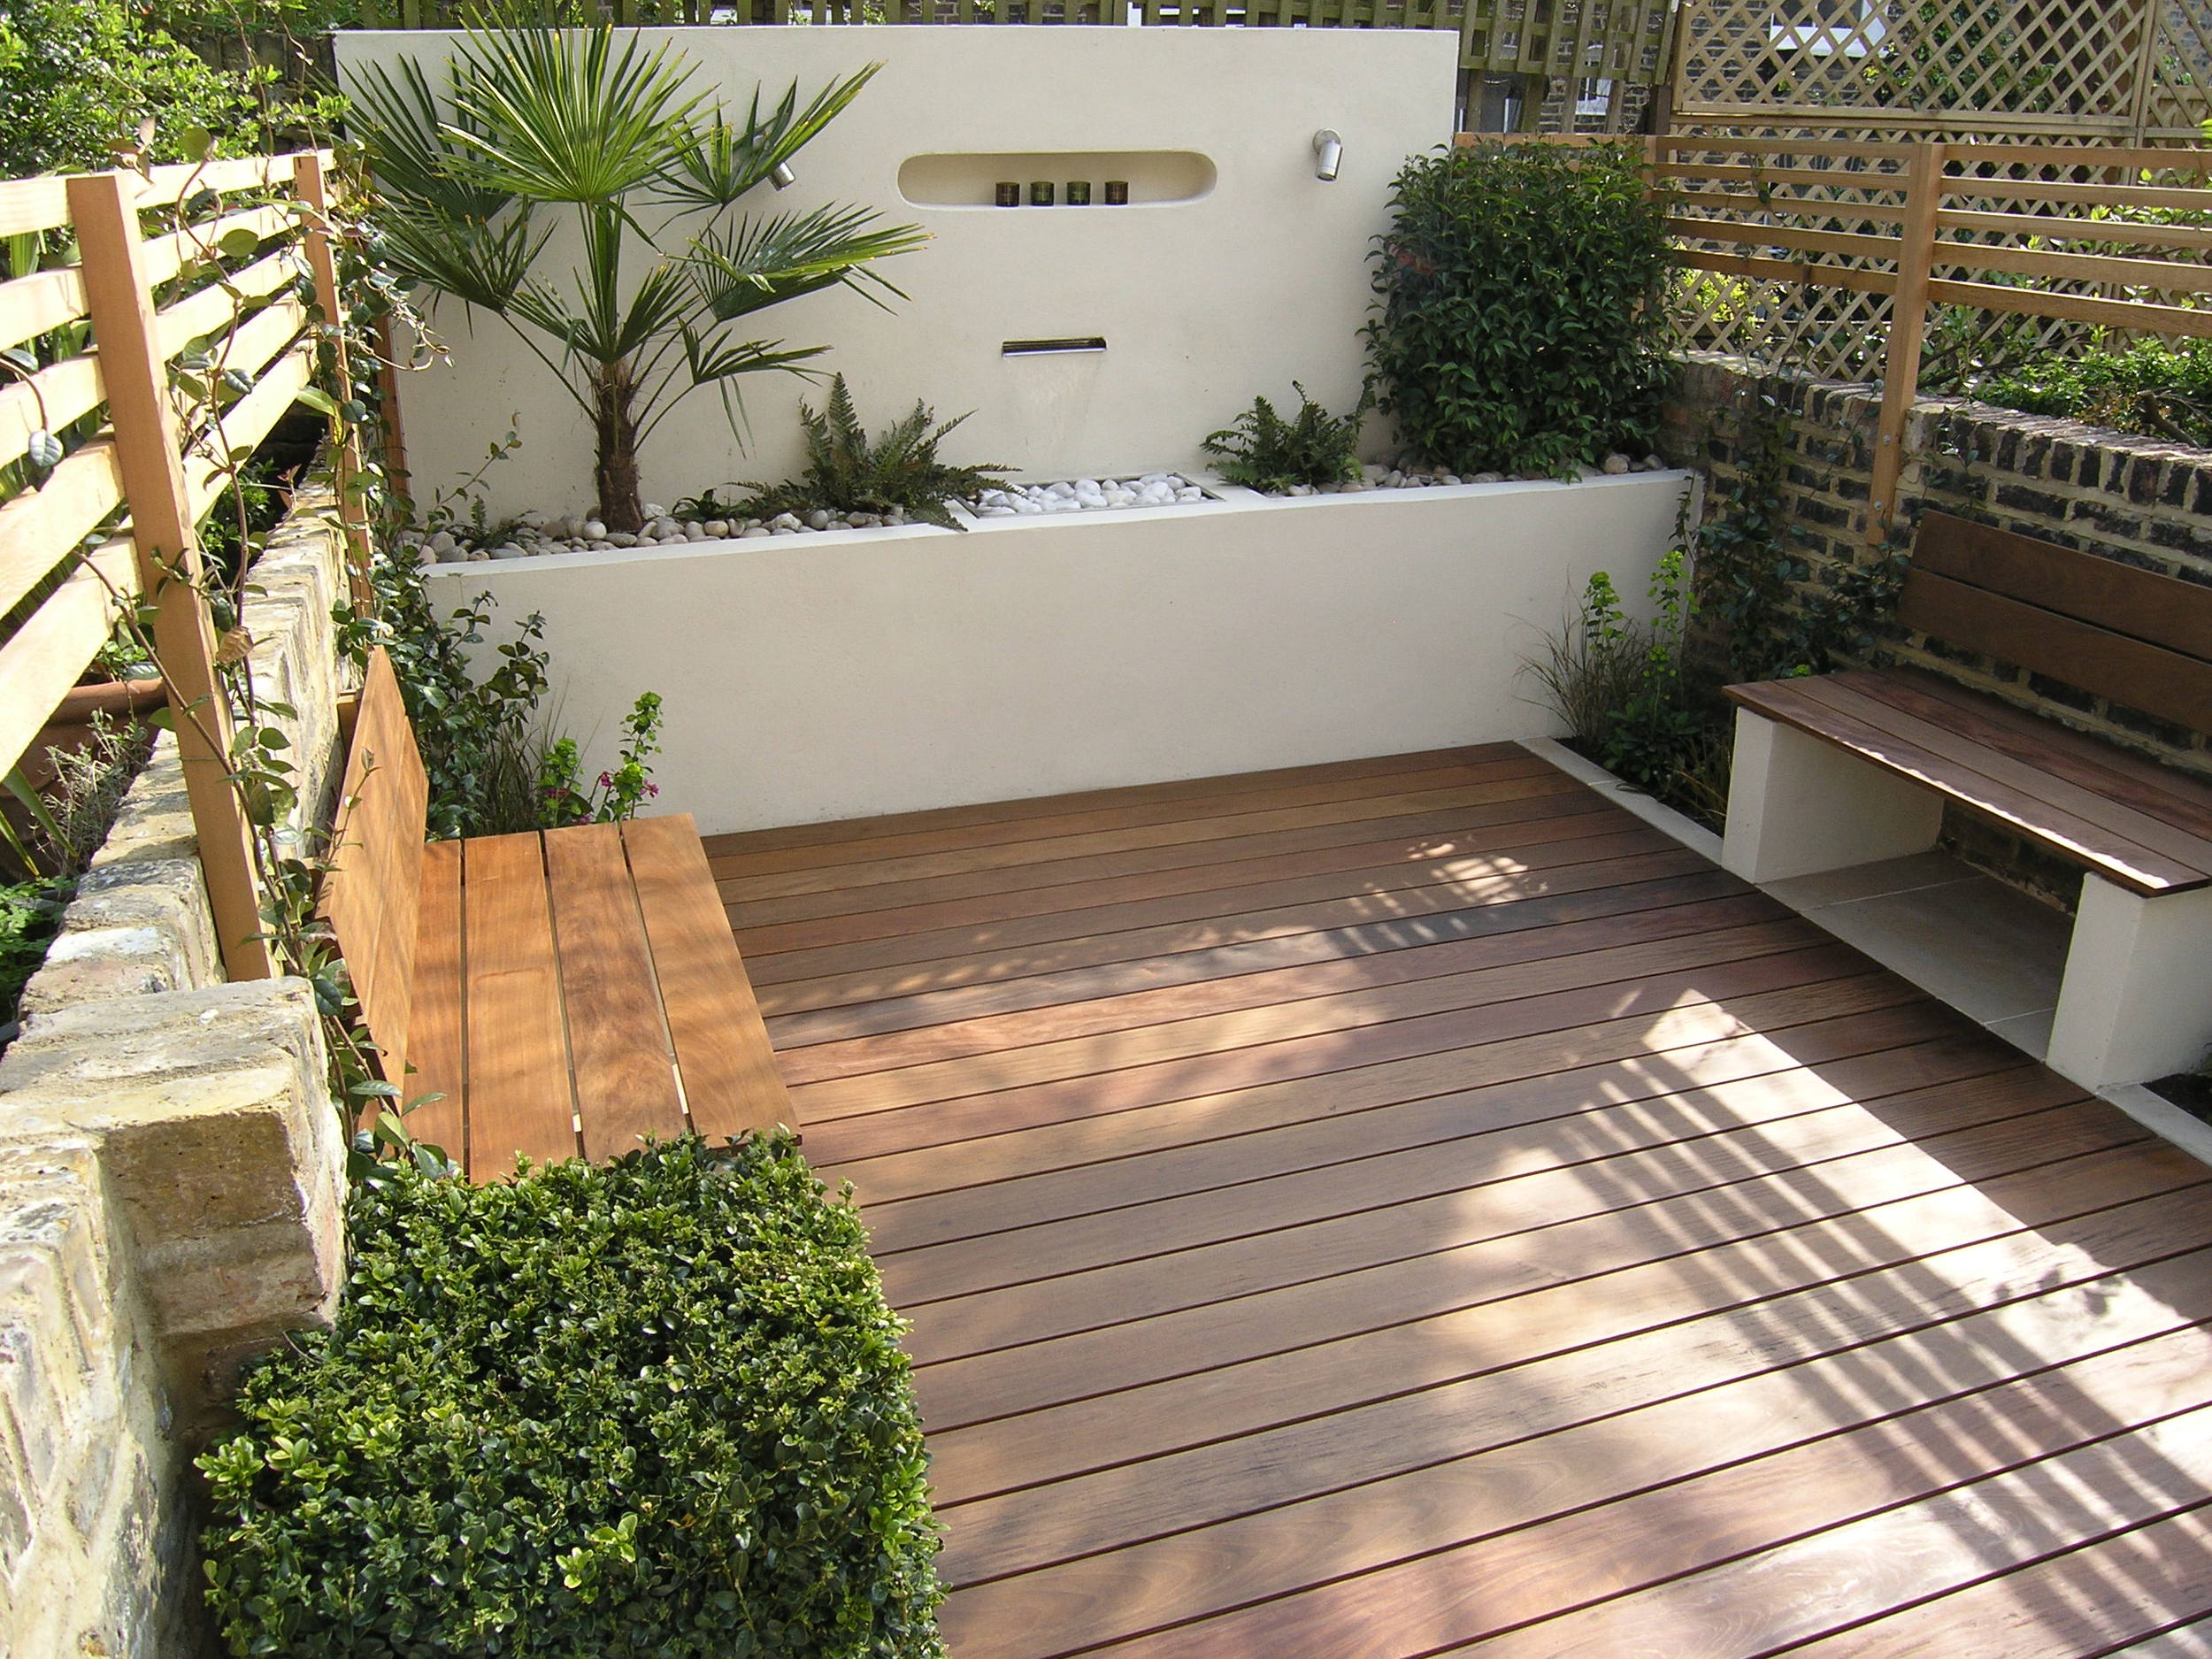 North London small garden landscaping ideas with decking and seating